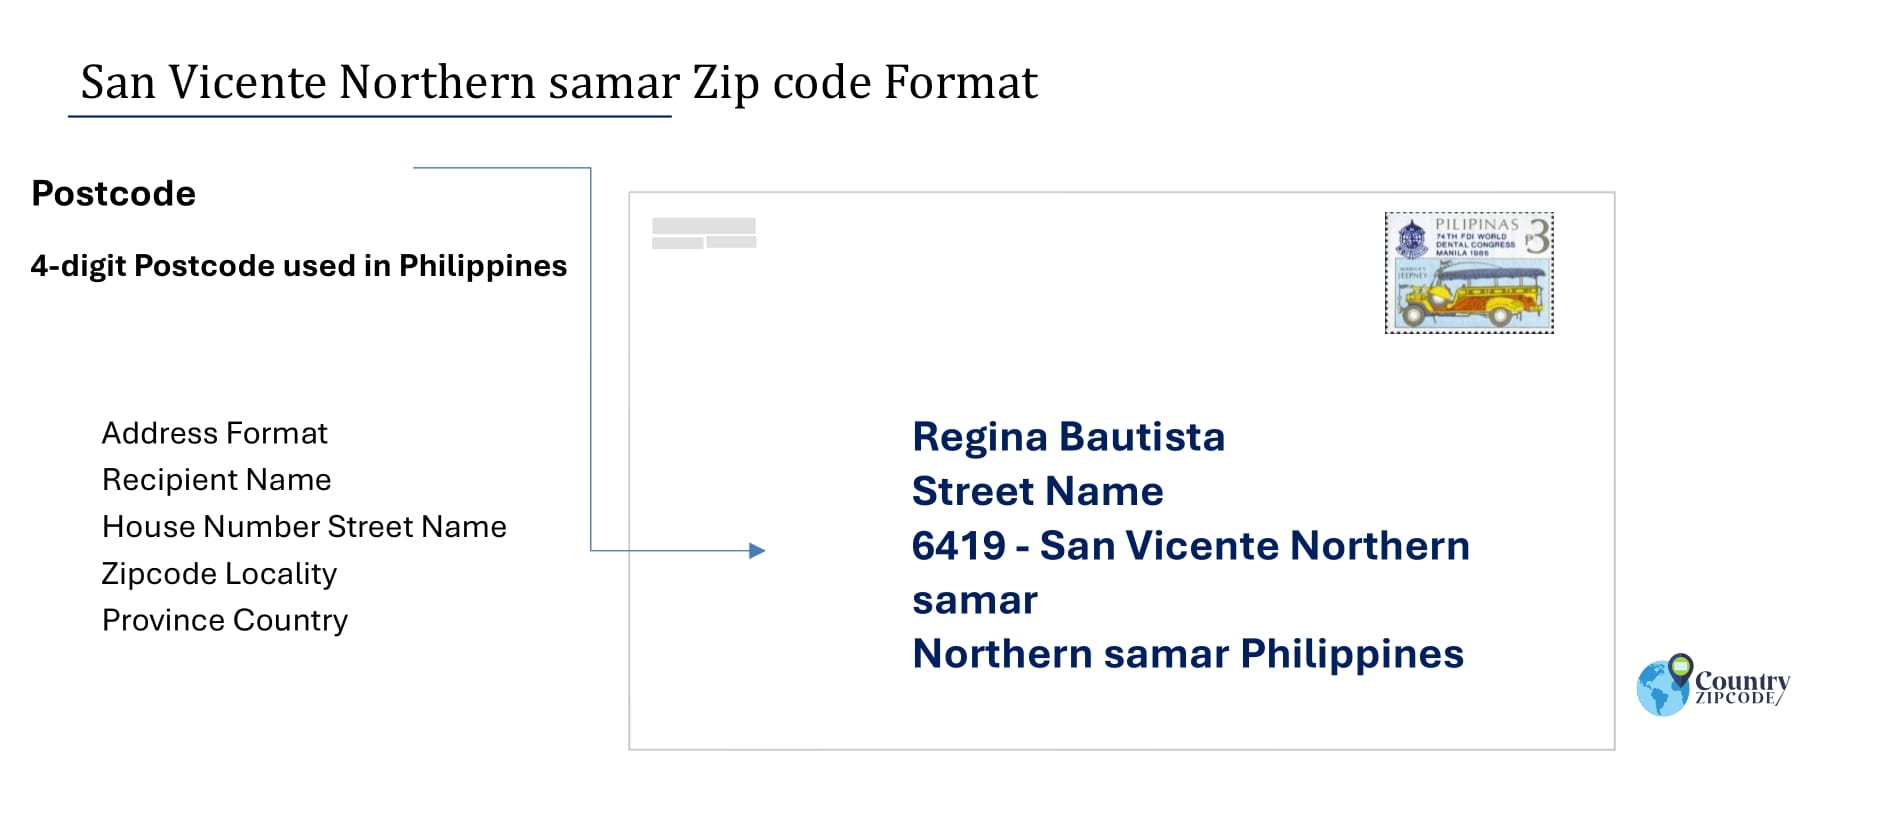 example of San Vicente Northern samar Philippines zip code and address format